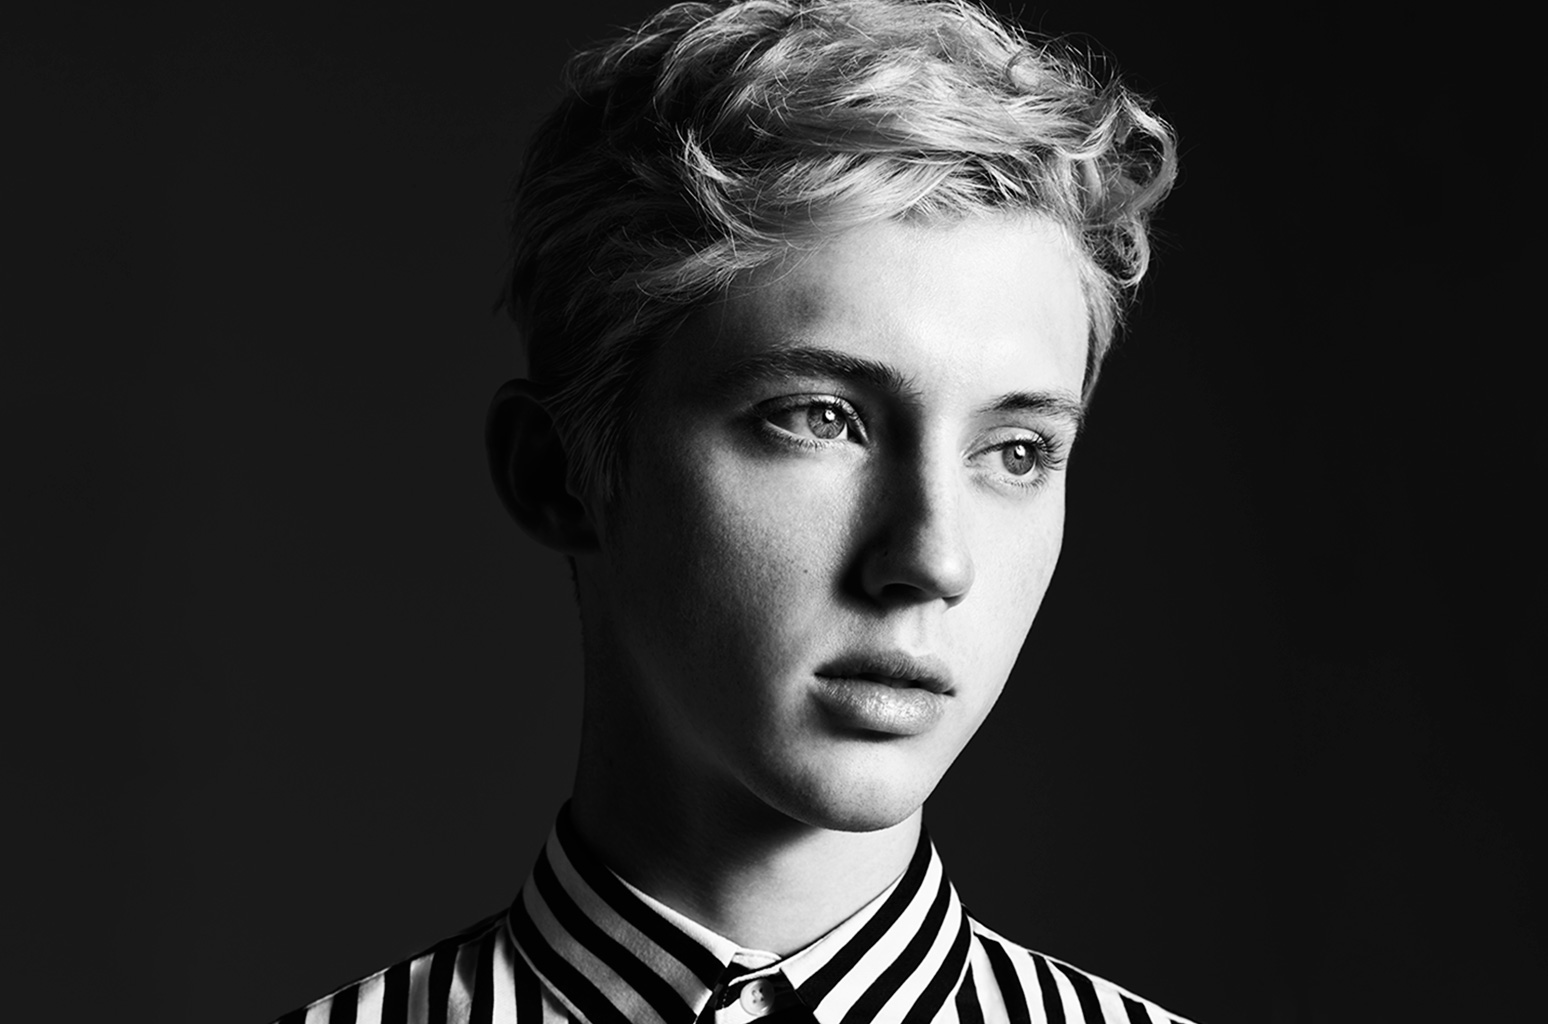 Troye Sivan embraces sexuality in "Bloom," queer musician, album review, by the queer magazine, OutWrite Newsmagazine